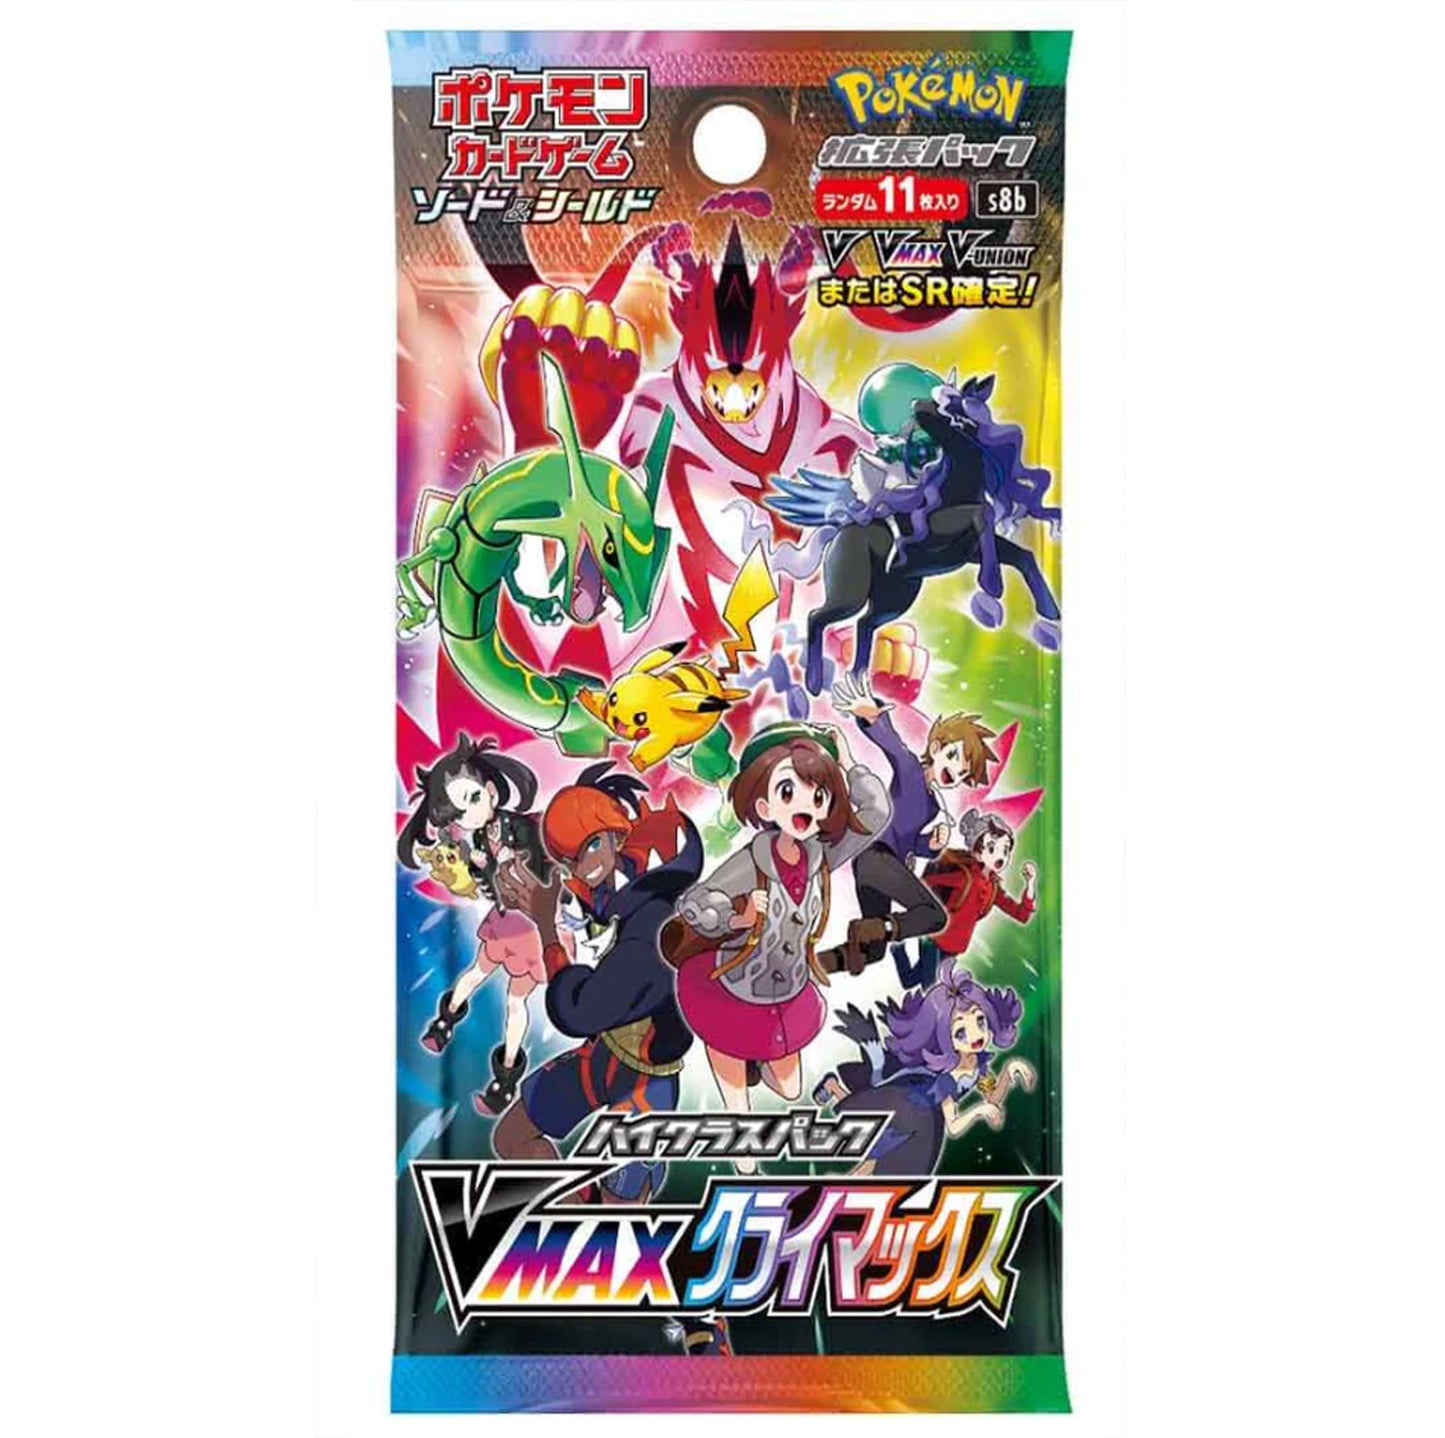 ABOUT POKEMON SB8 VMAX CLIMAX JAPANESE